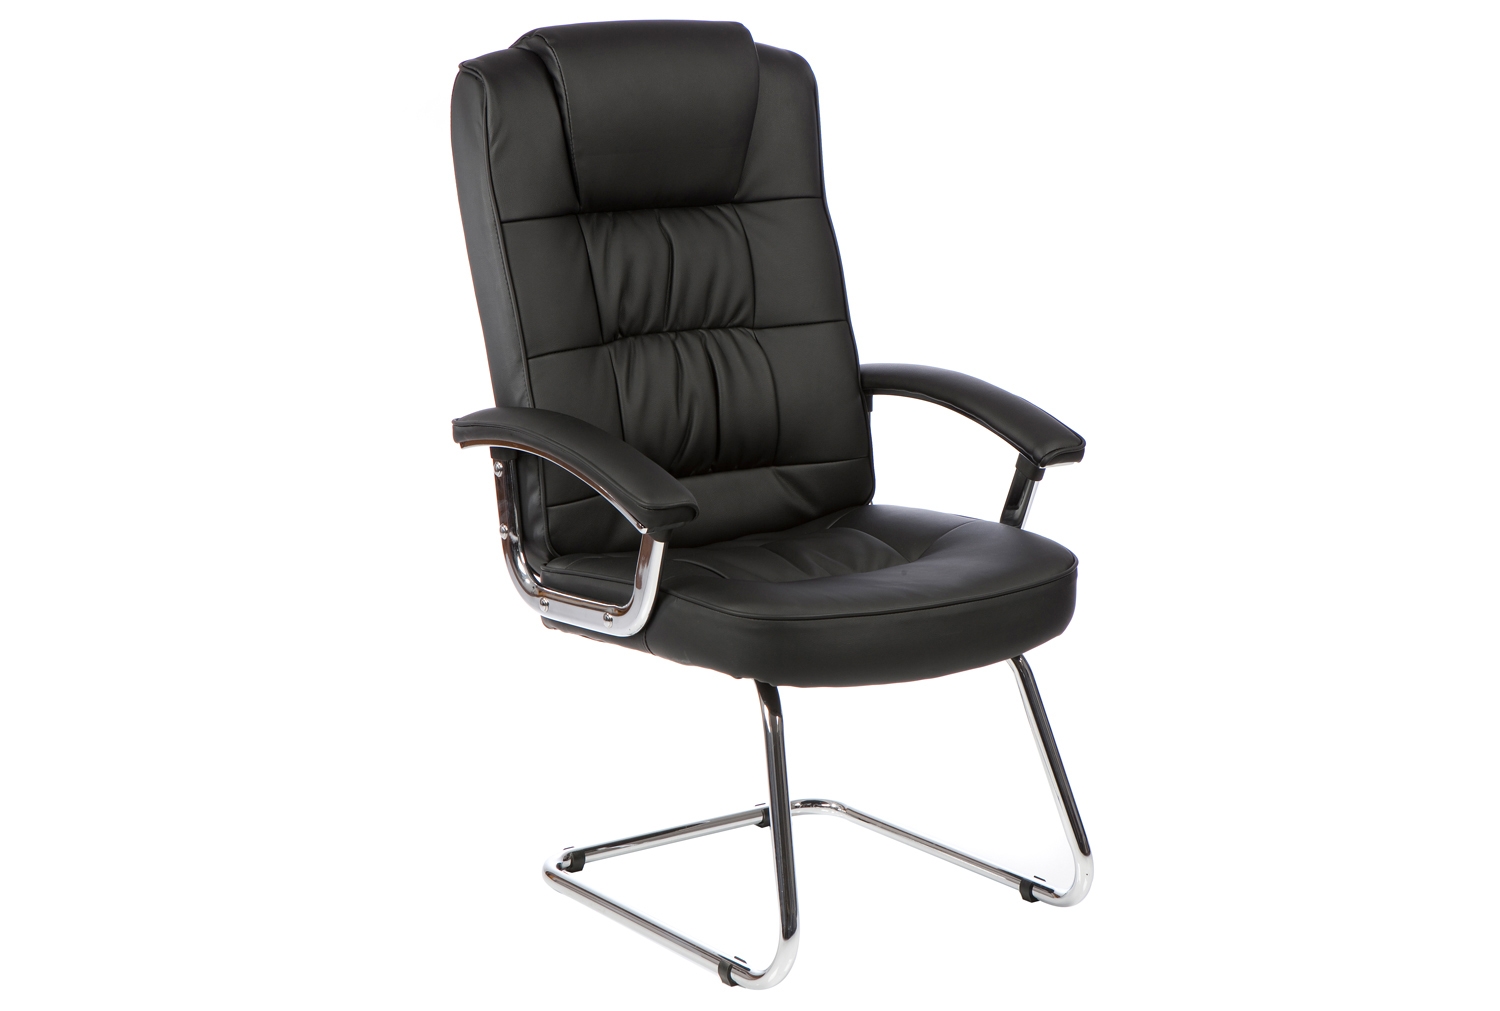 Muscat Deluxe Leather Cantilever Office Chair, Black